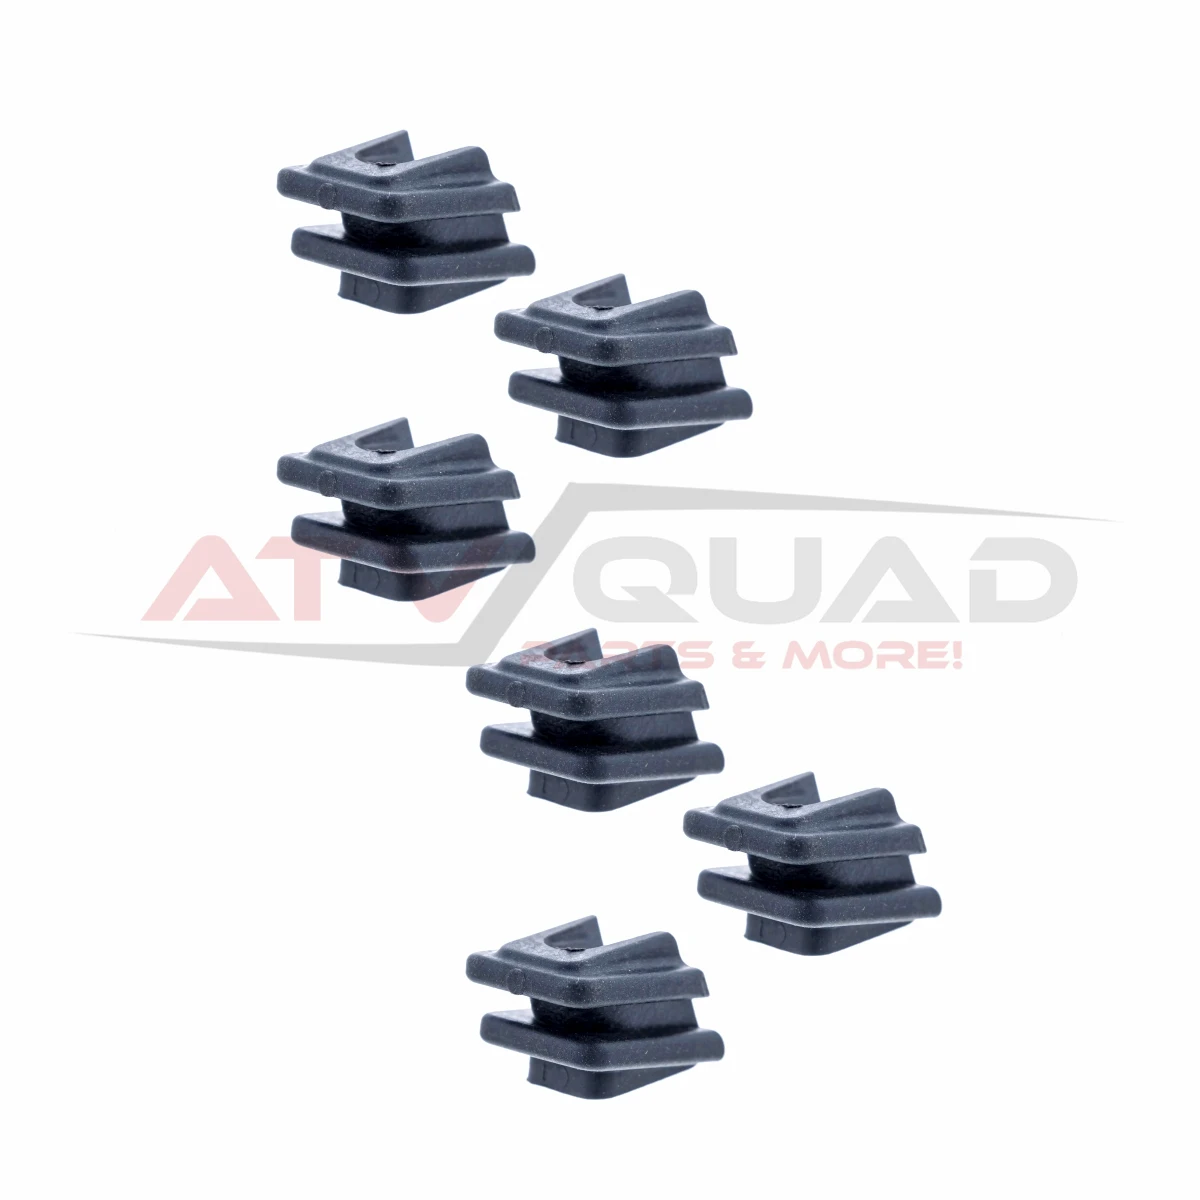 Drive Pulley Outer Plate Nylon Slider for CFmoto 400 450 500S 520 500HO X5HO 550 X550 U550 Z550 600 625 Gladiator 0GR0-051006 50pcs metal 5 zipper pullers slider for nylon zipper jacket coat zip repair kits zipper pull for diy sewing clothes bag craft